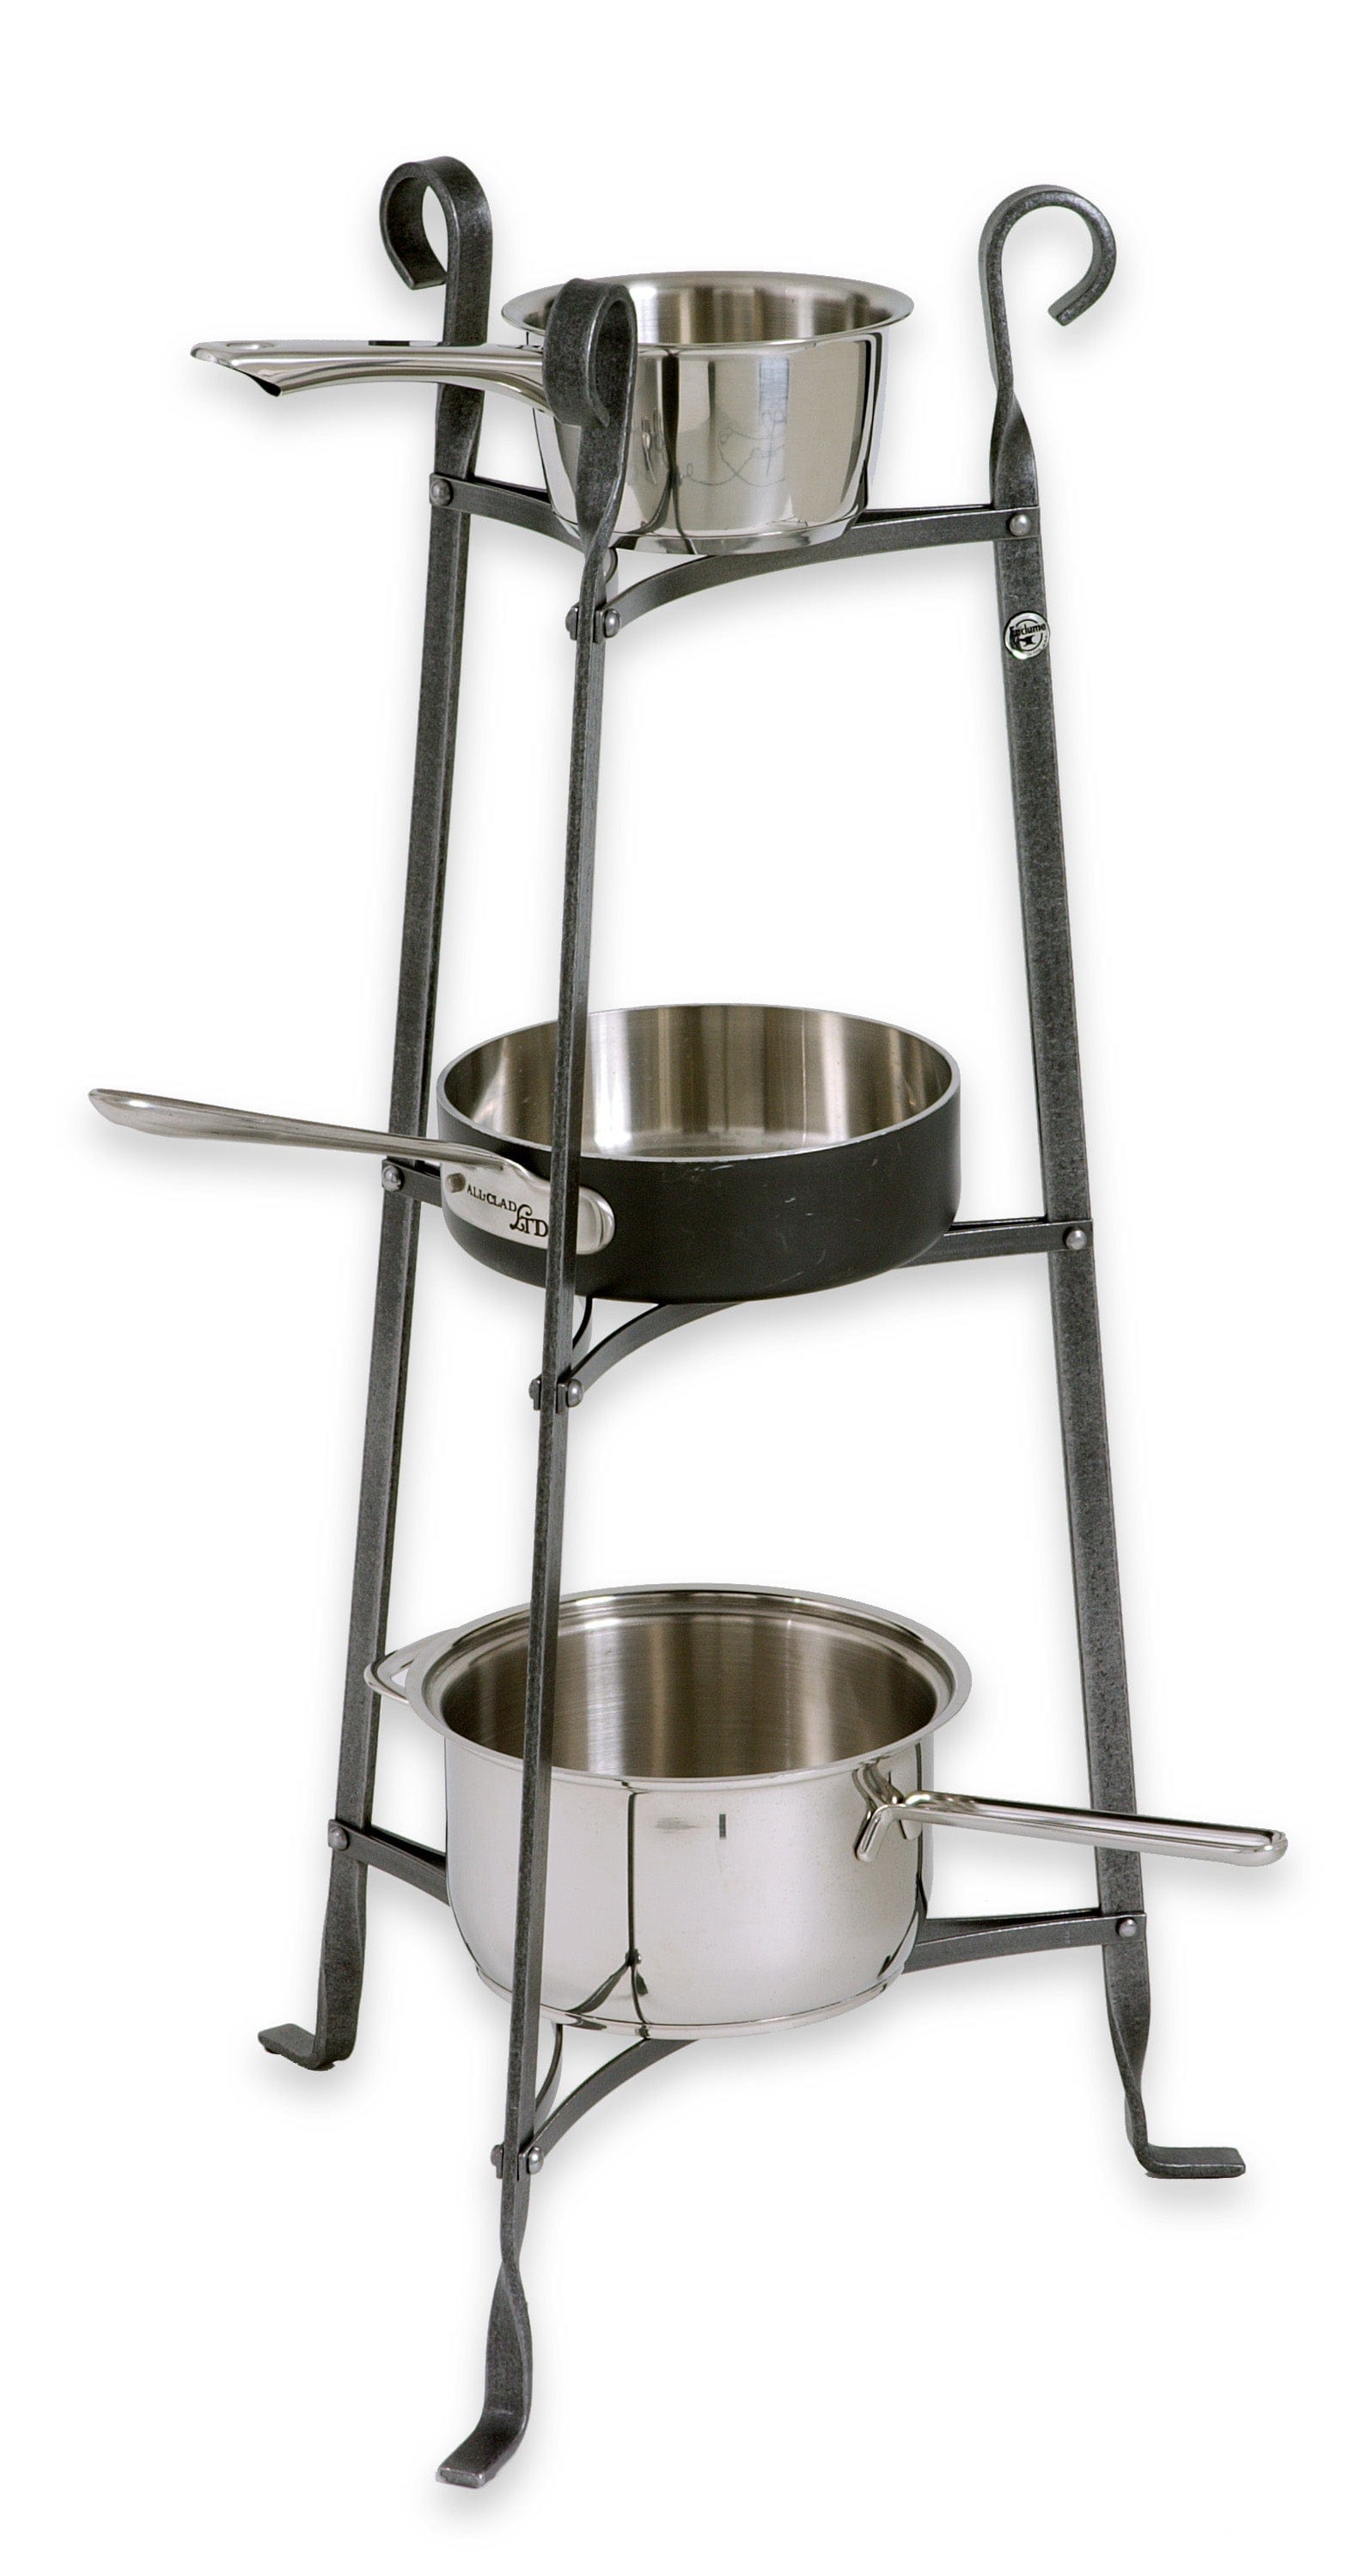 Enclume 8-Tier Hammered Steel Cookware Stand